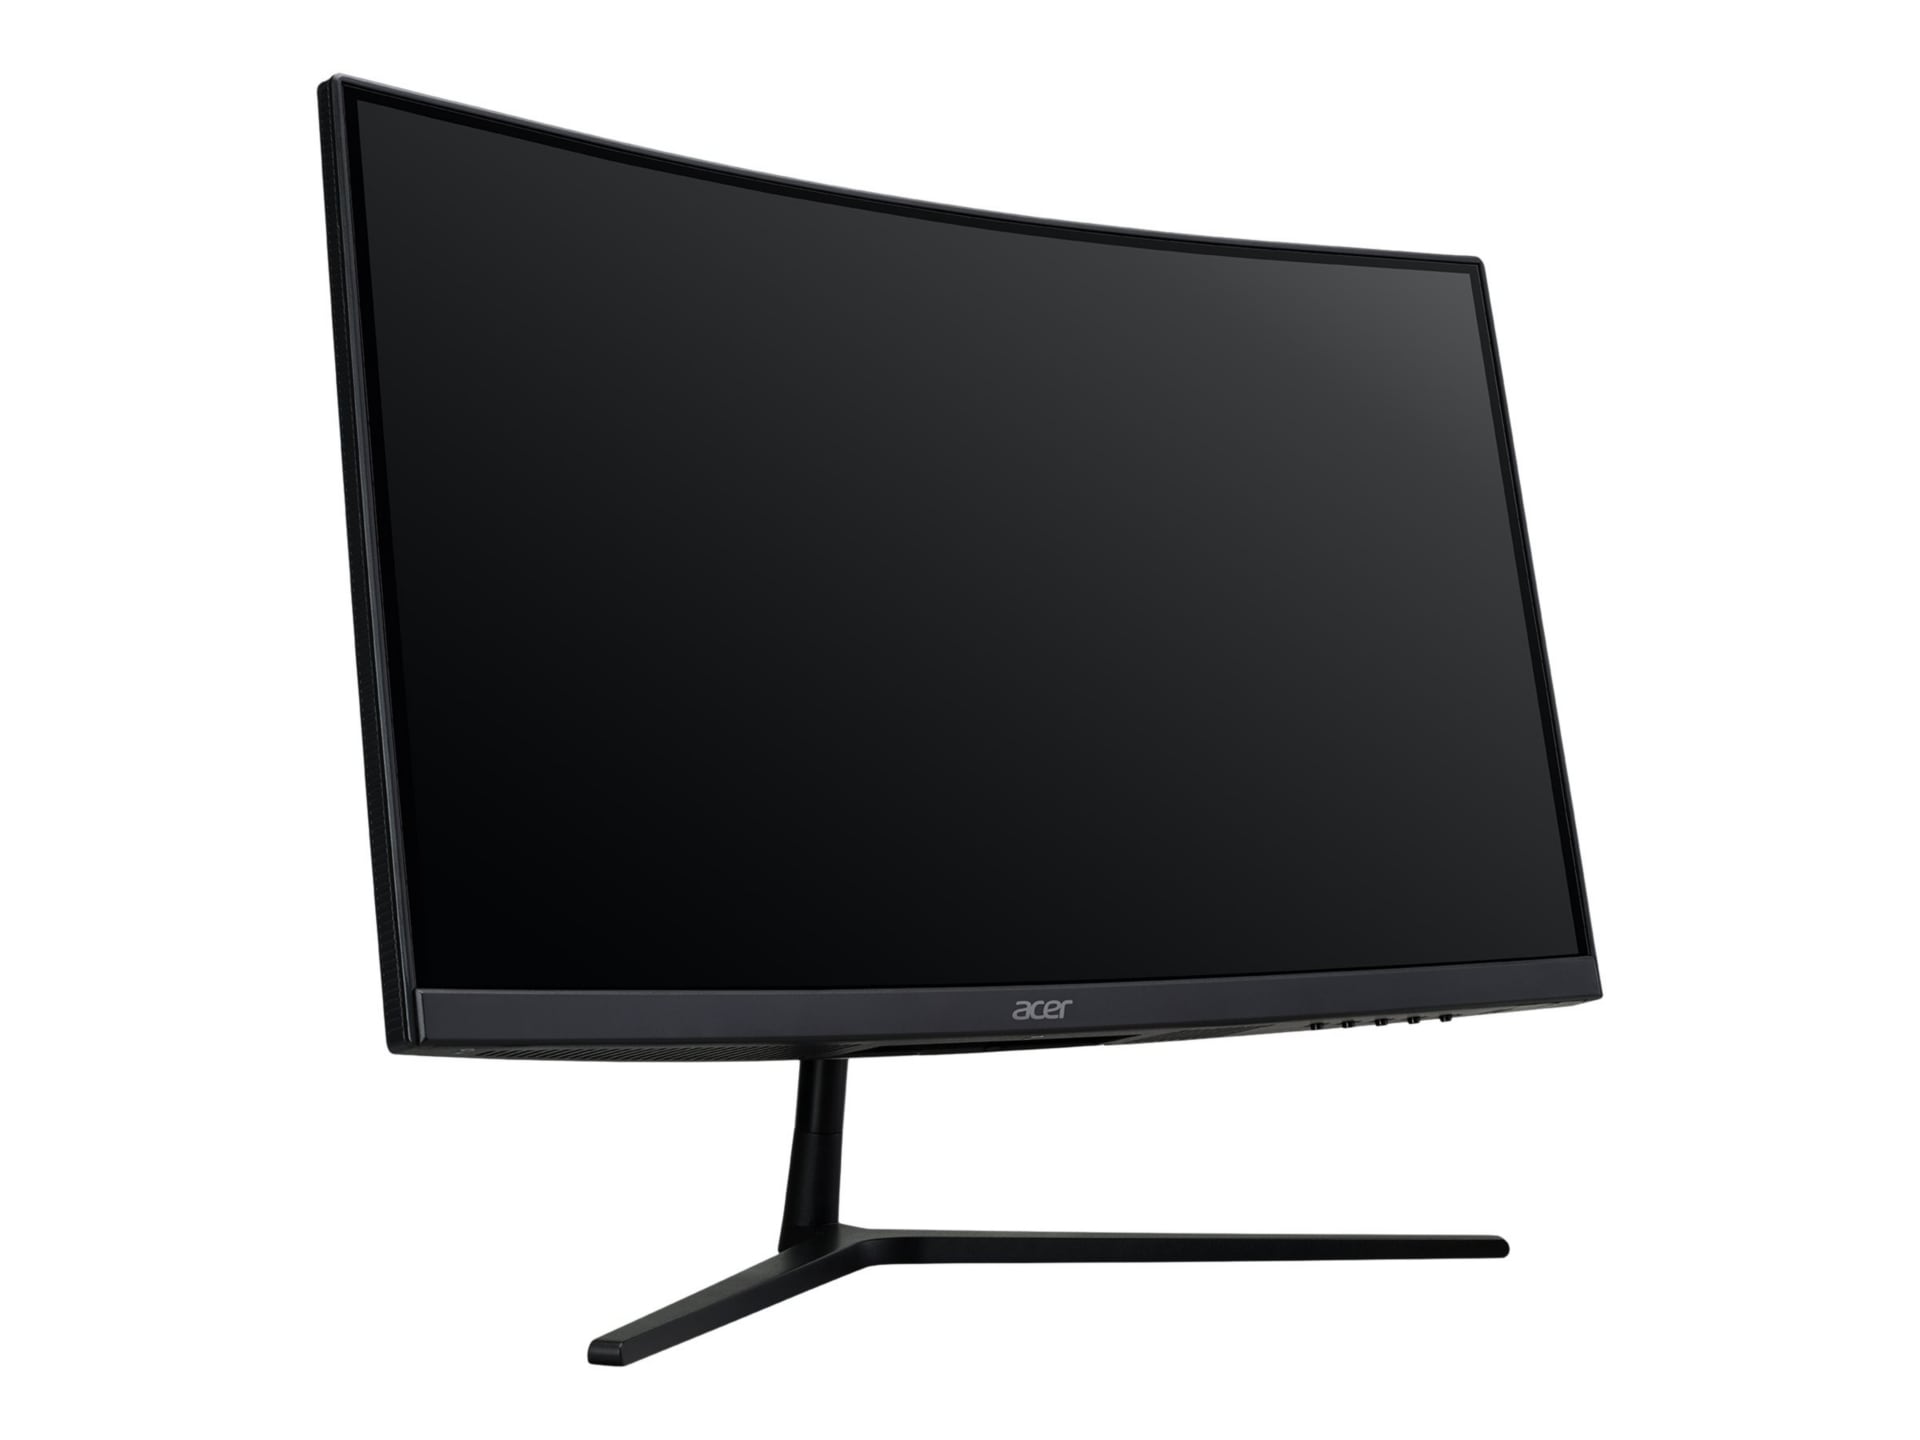 Acer HD LED Backlit Computer Monitor - iTechStore